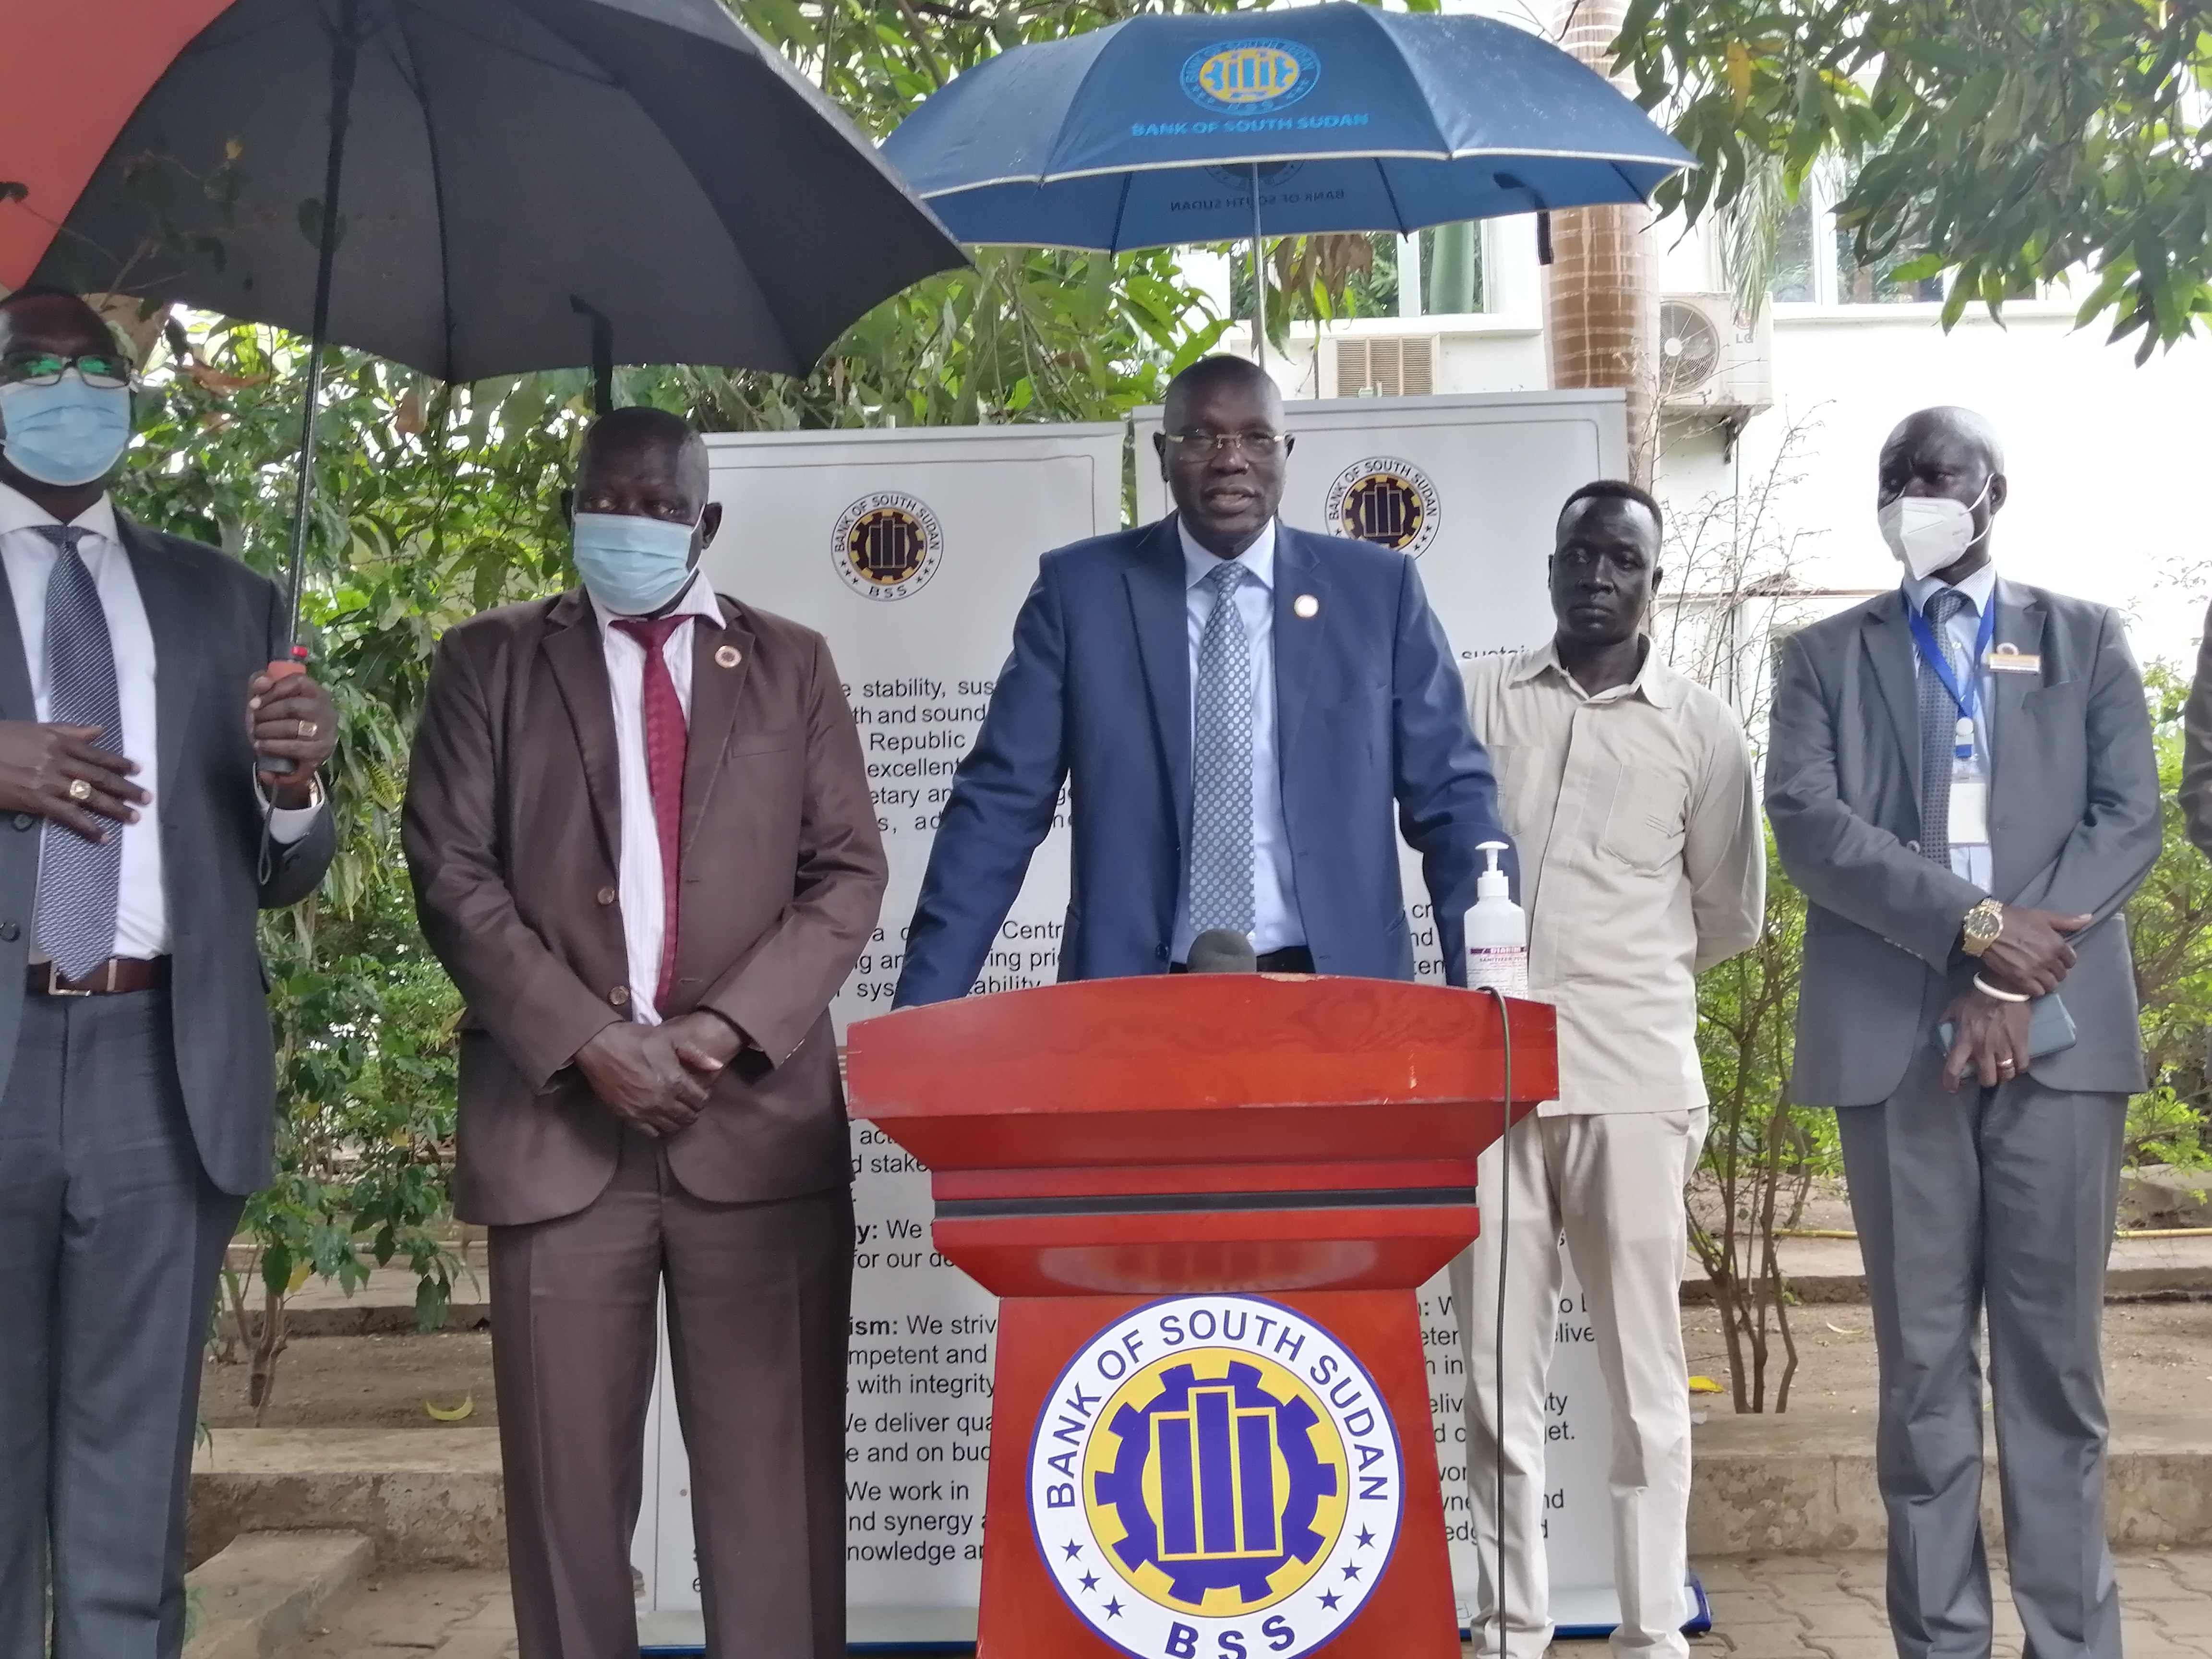 South Sudan wires over $1million of unpaid arrears to EAC account